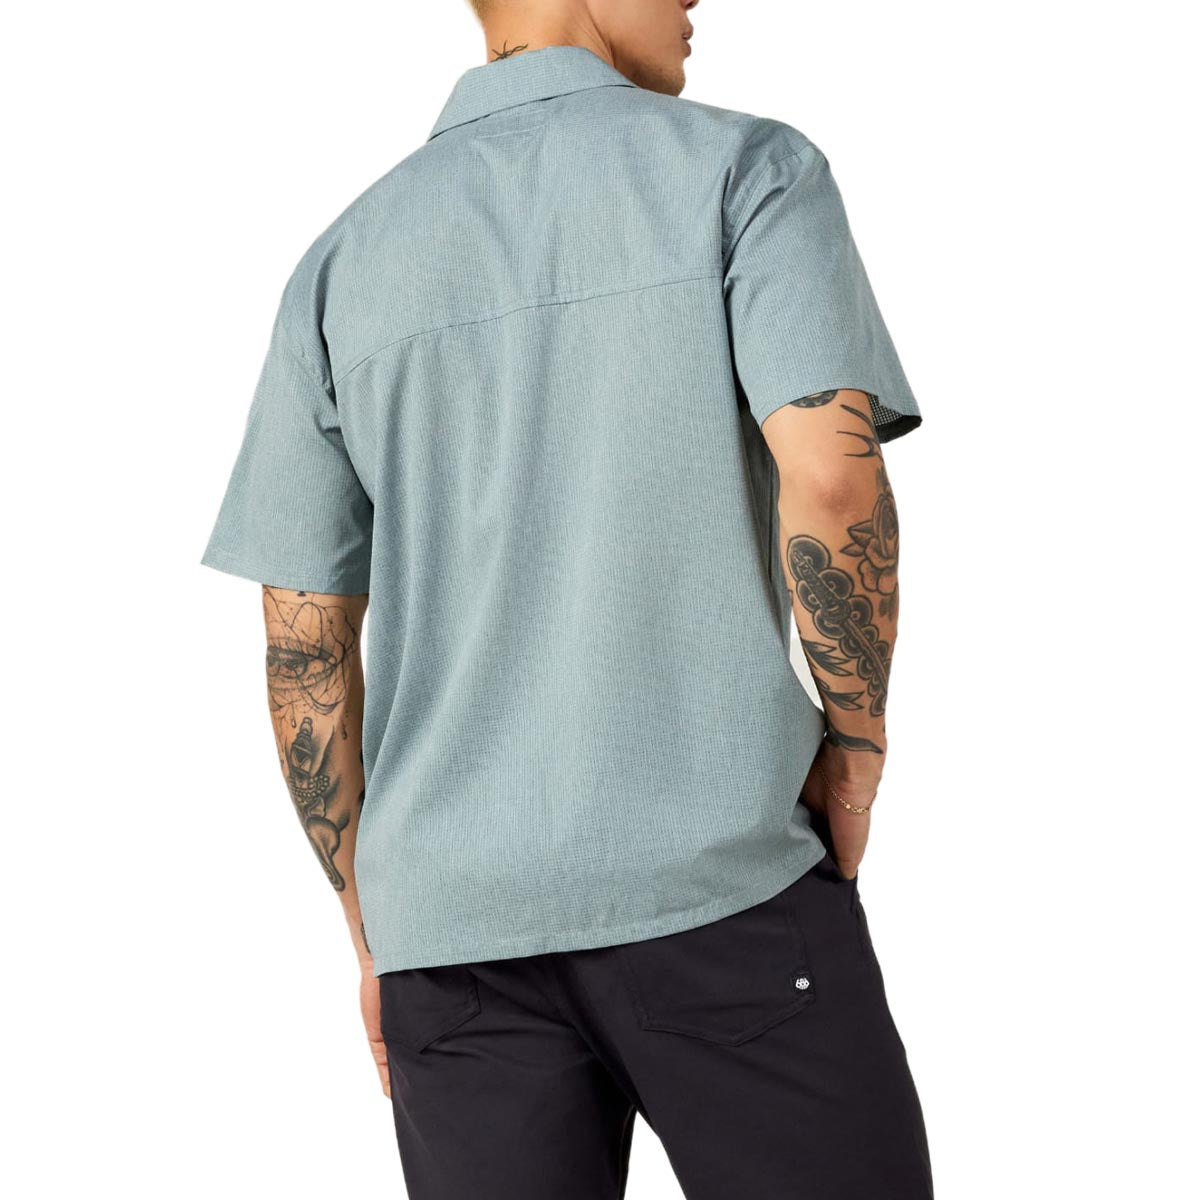 686 Canopy Woven Shirt - Heather Lead image 2